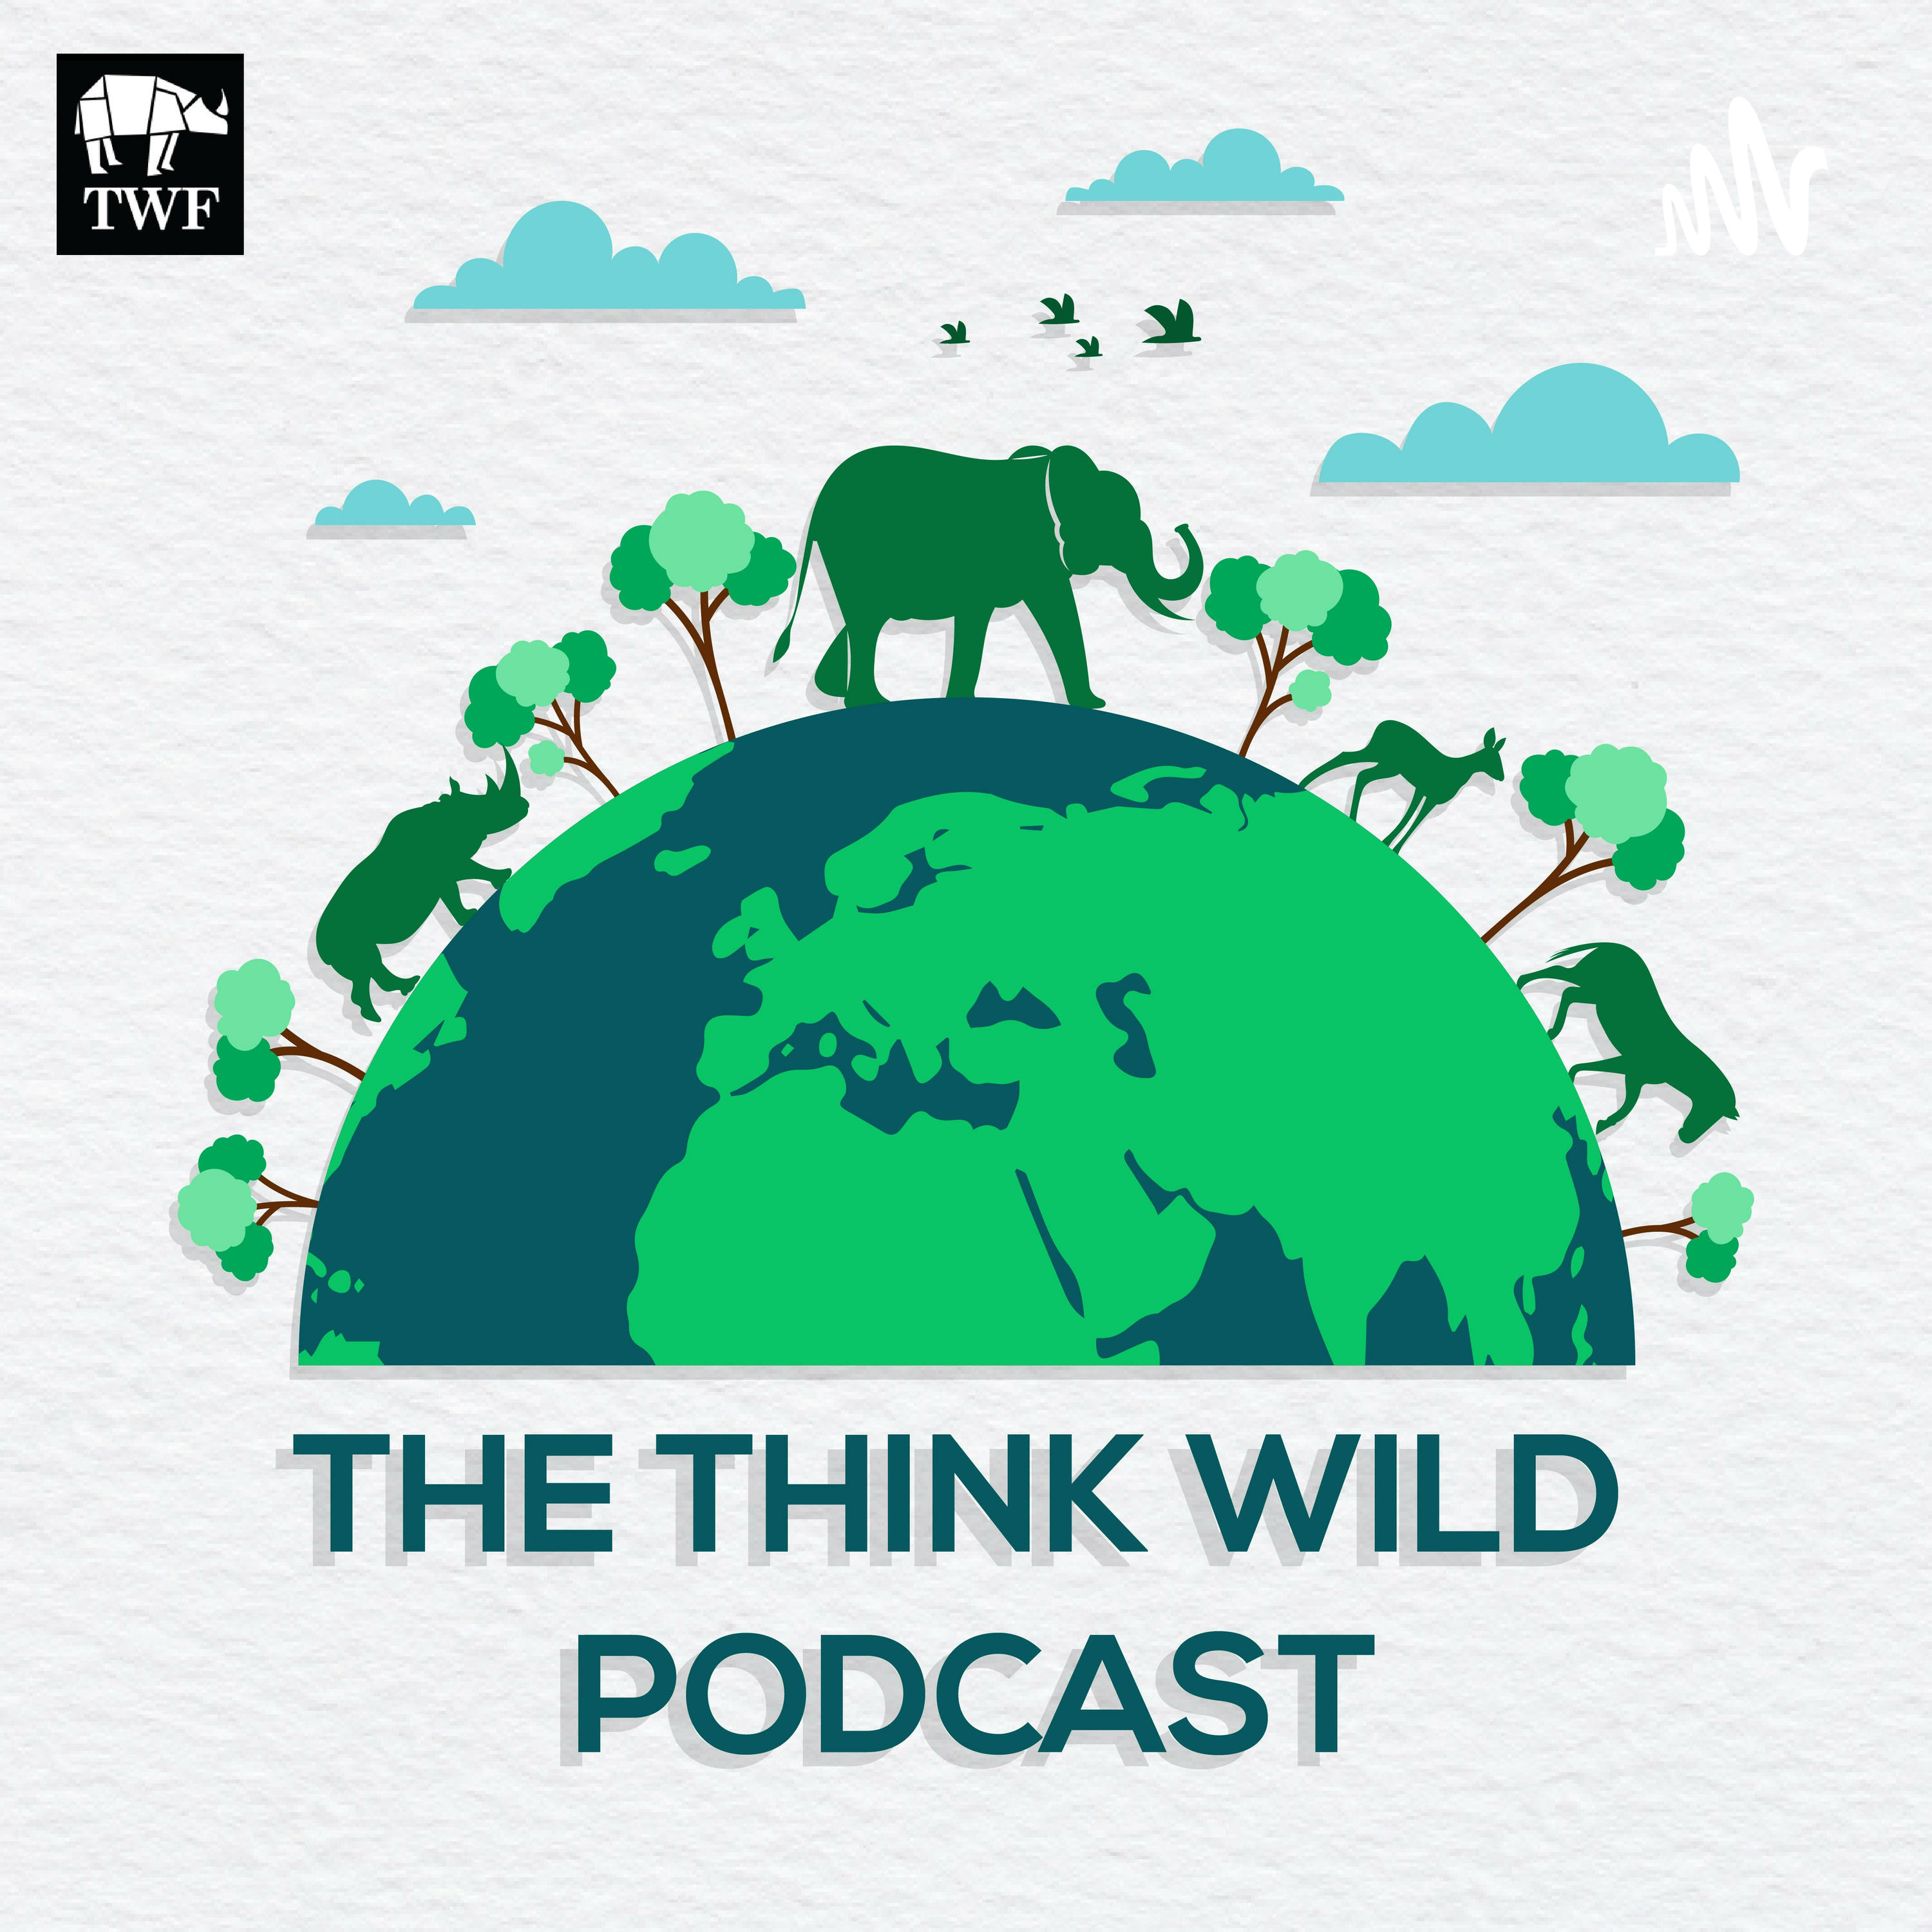 Episode 47: Rewilding Scotland with Peter Cairns, Executive Director, SCOTLAND: The Big Picture